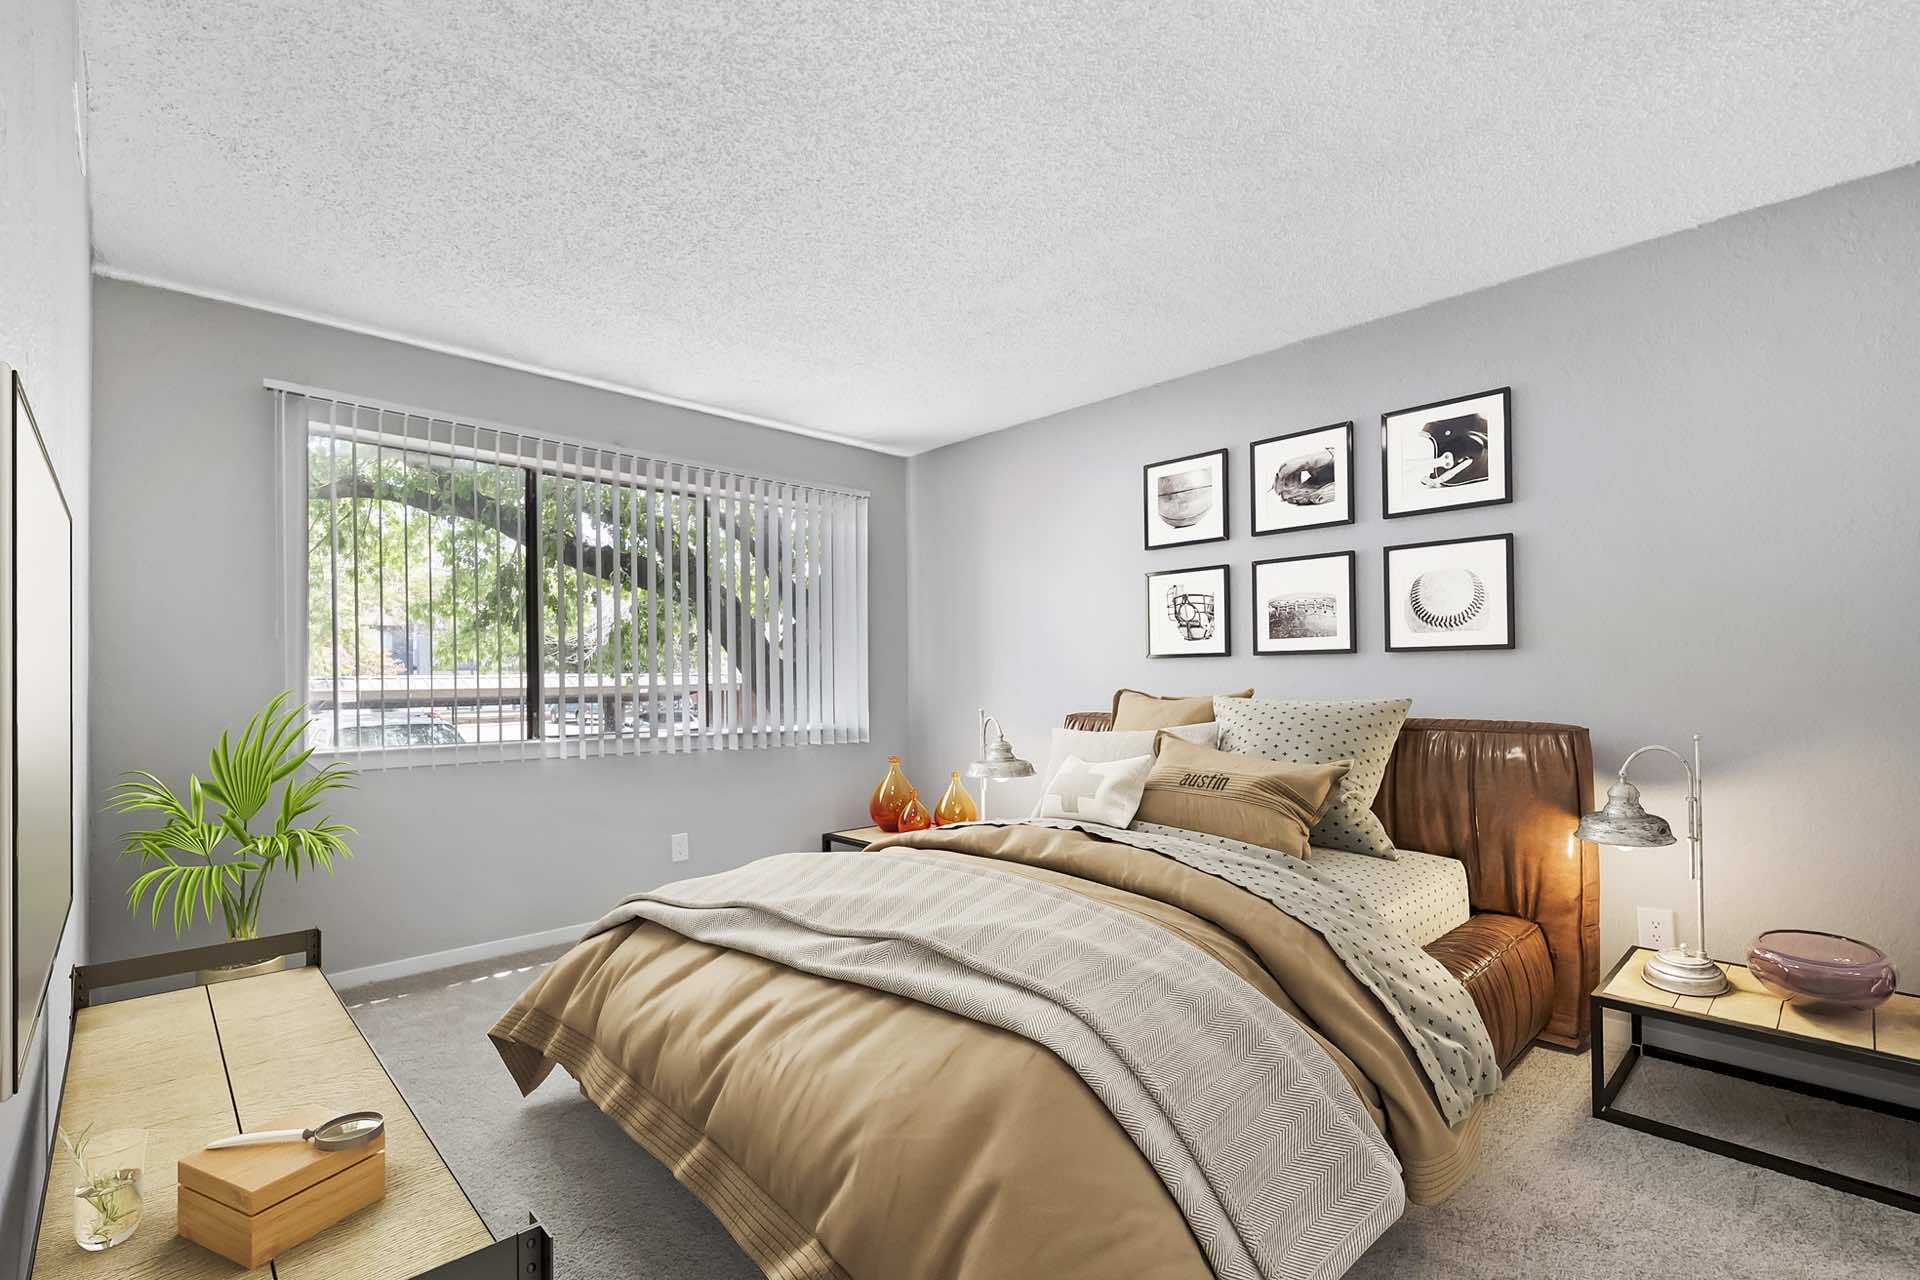 bedroom with wall art, plush carpeting and natural lighting